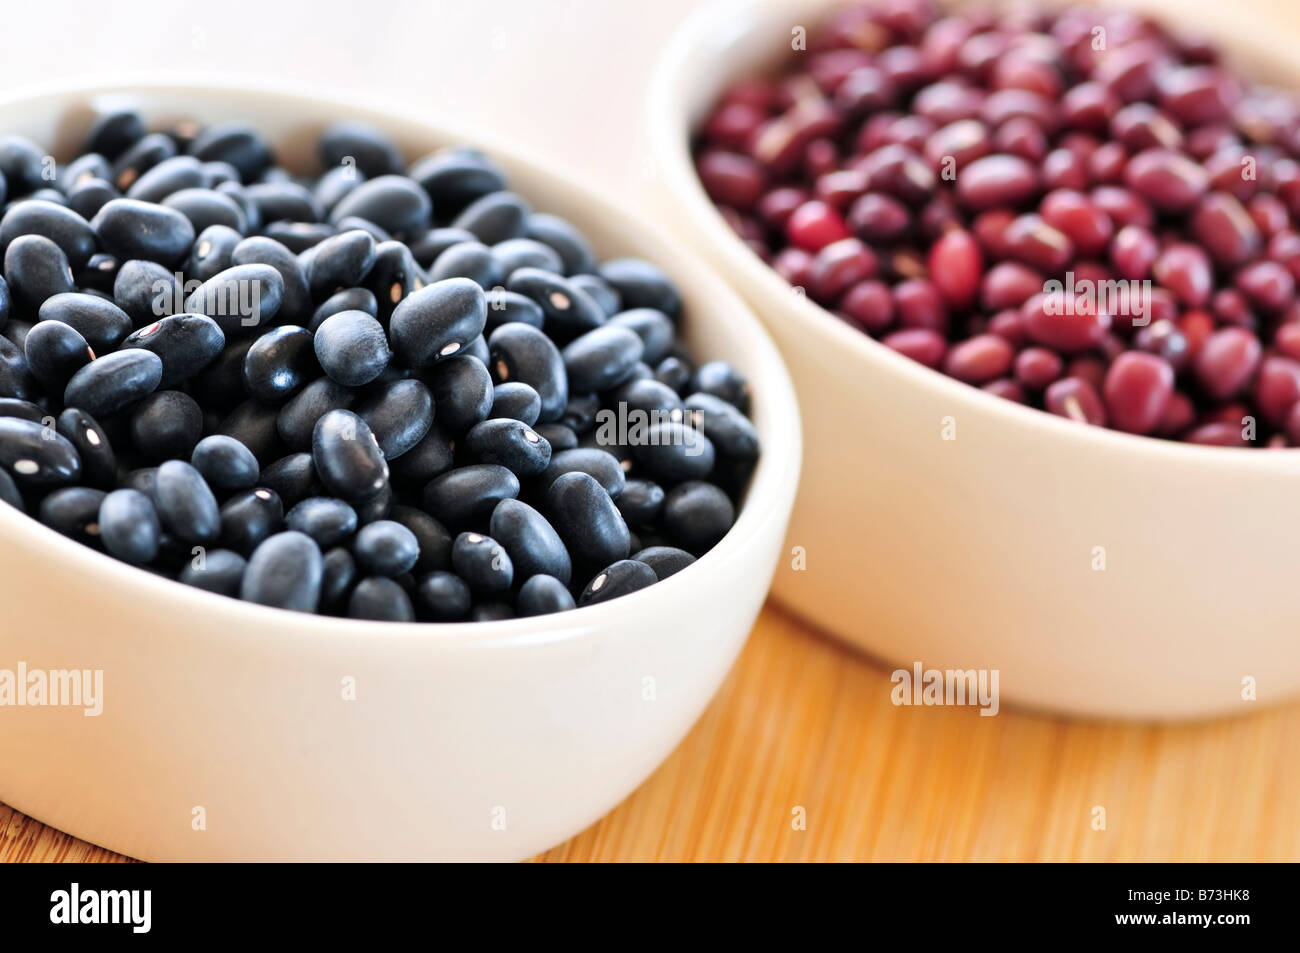 Dry black and red adzuki beans in bowls Stock Photo